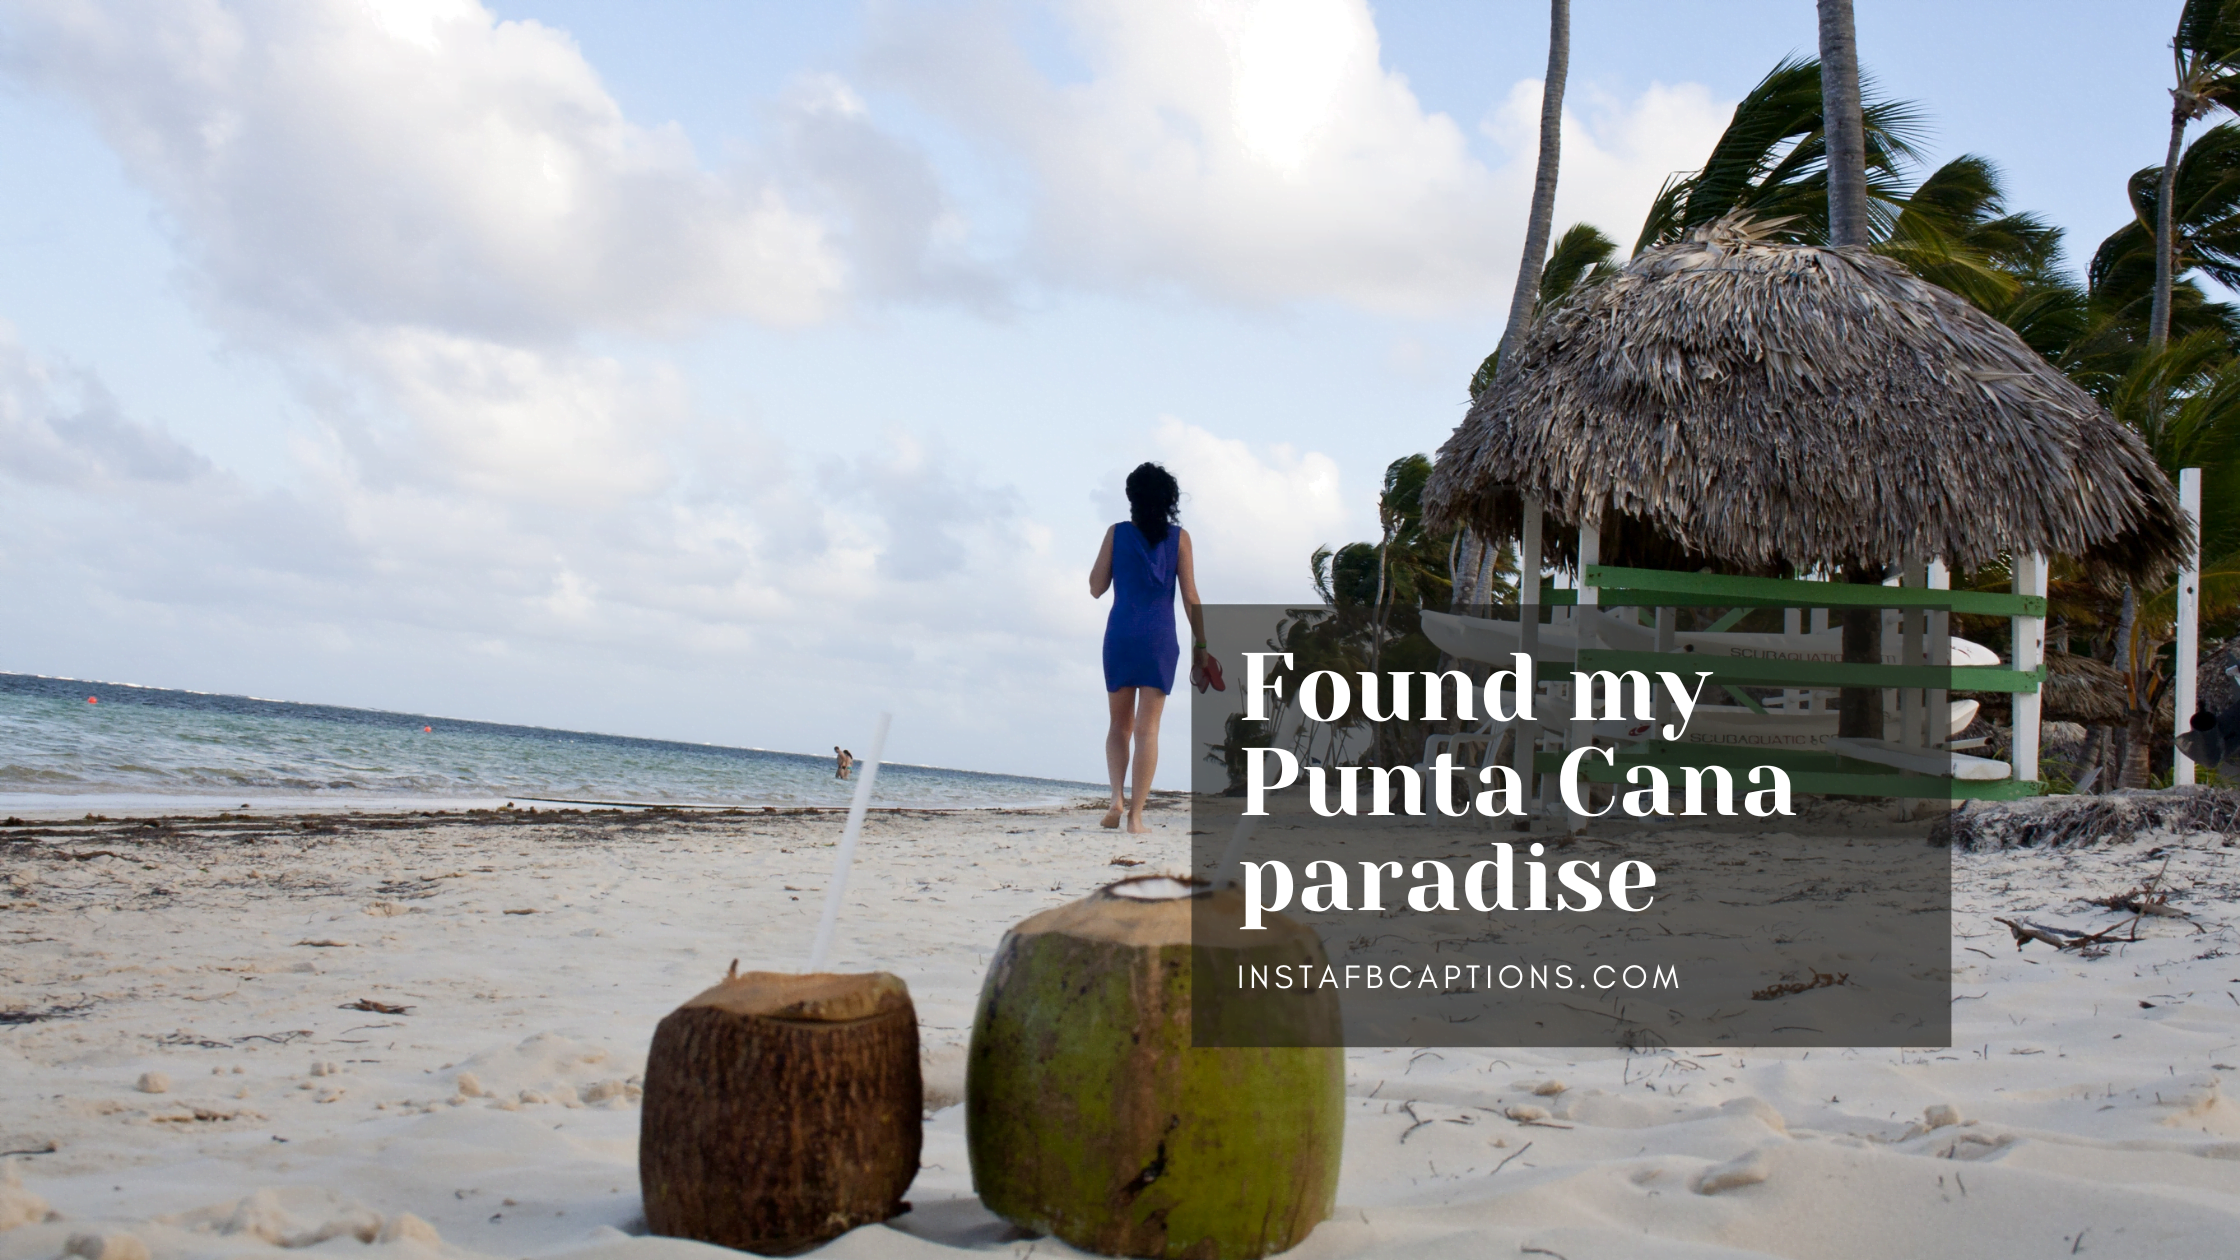 Punta Cana Quotes And Captions  - Punta Cana Quotes and Captions  - Punta Cana Captions for Posting on Instagram in 2022